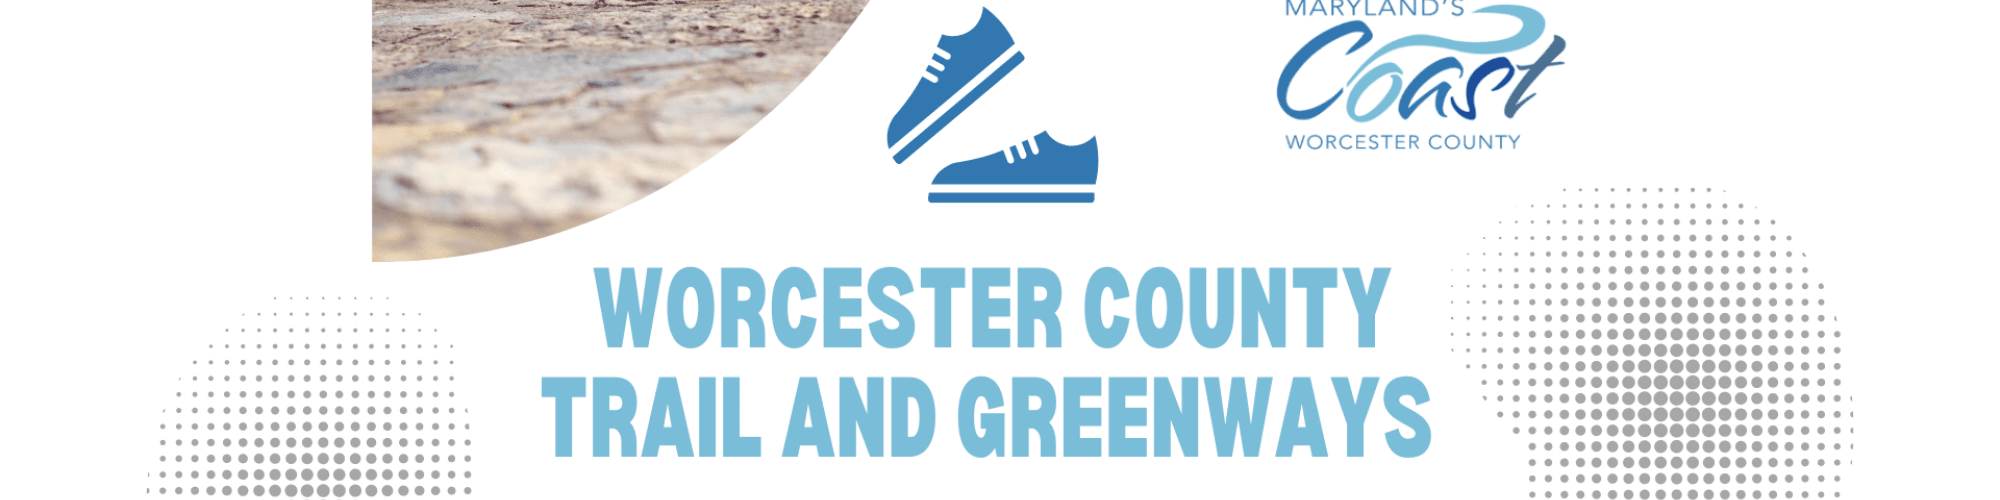 Worcester County Trail & Greenways Presentation Meeting on May 23